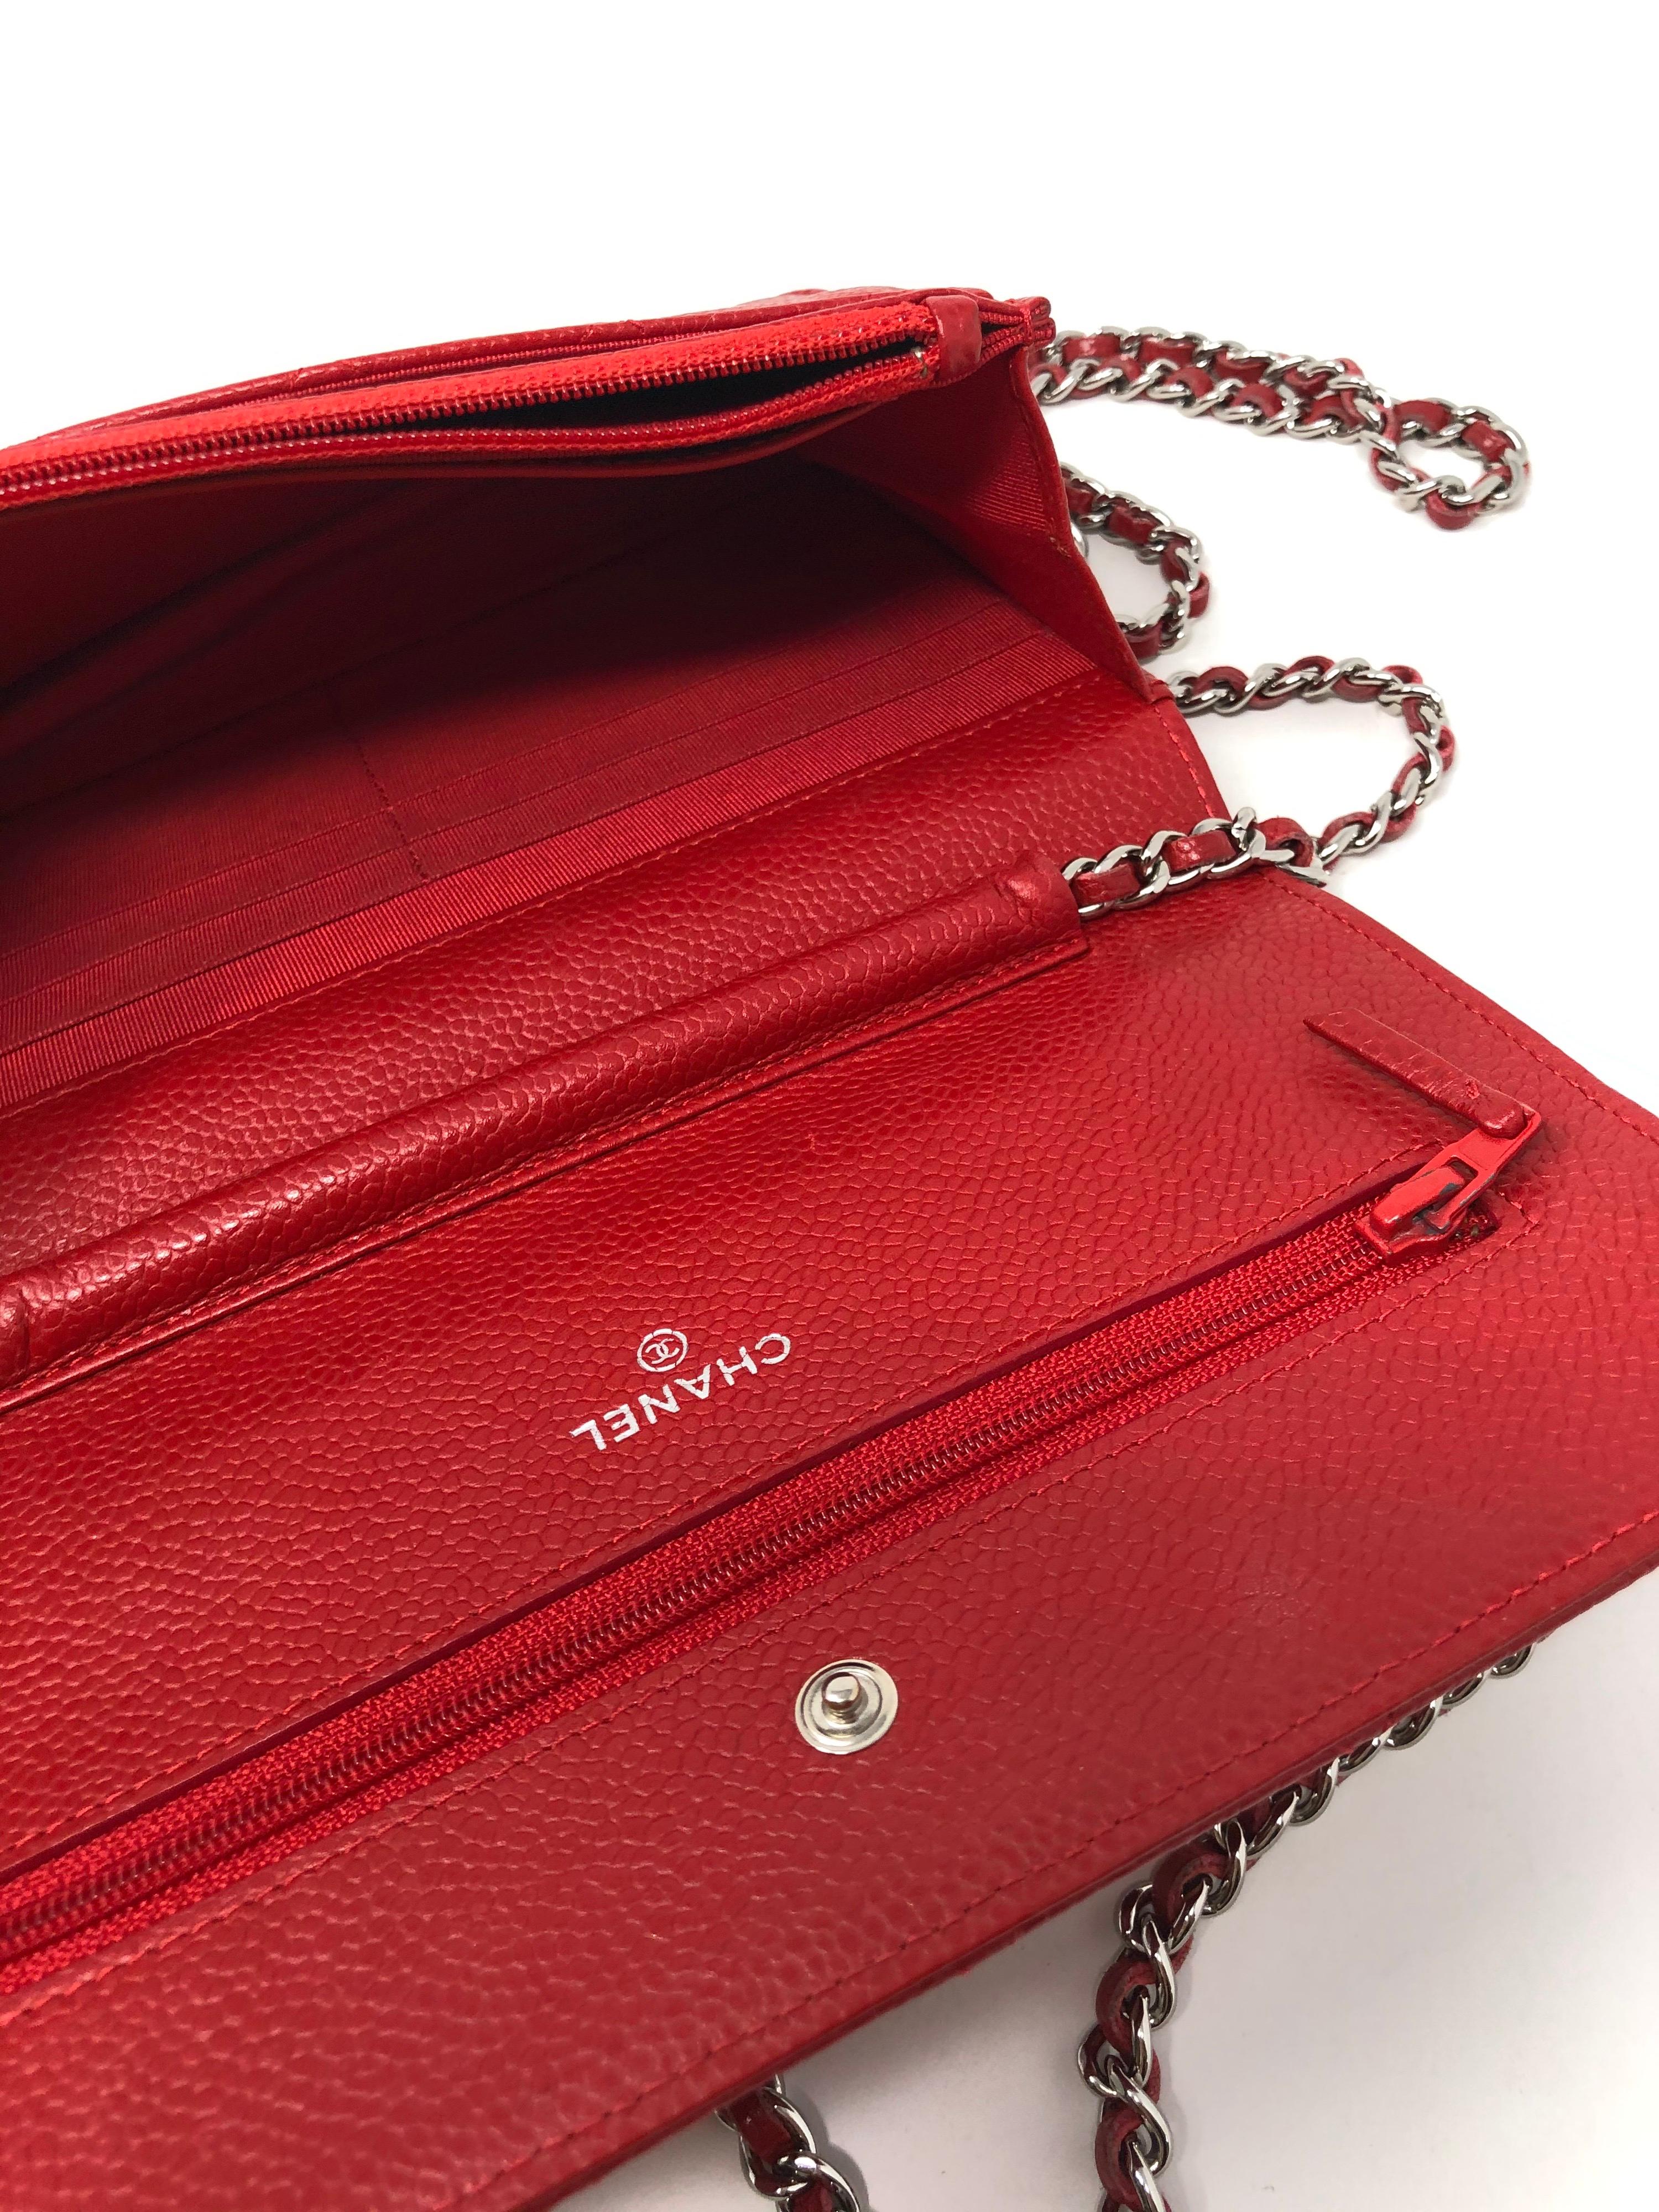 Women's or Men's Chanel Red Caviar Wallet On A Chain Bag